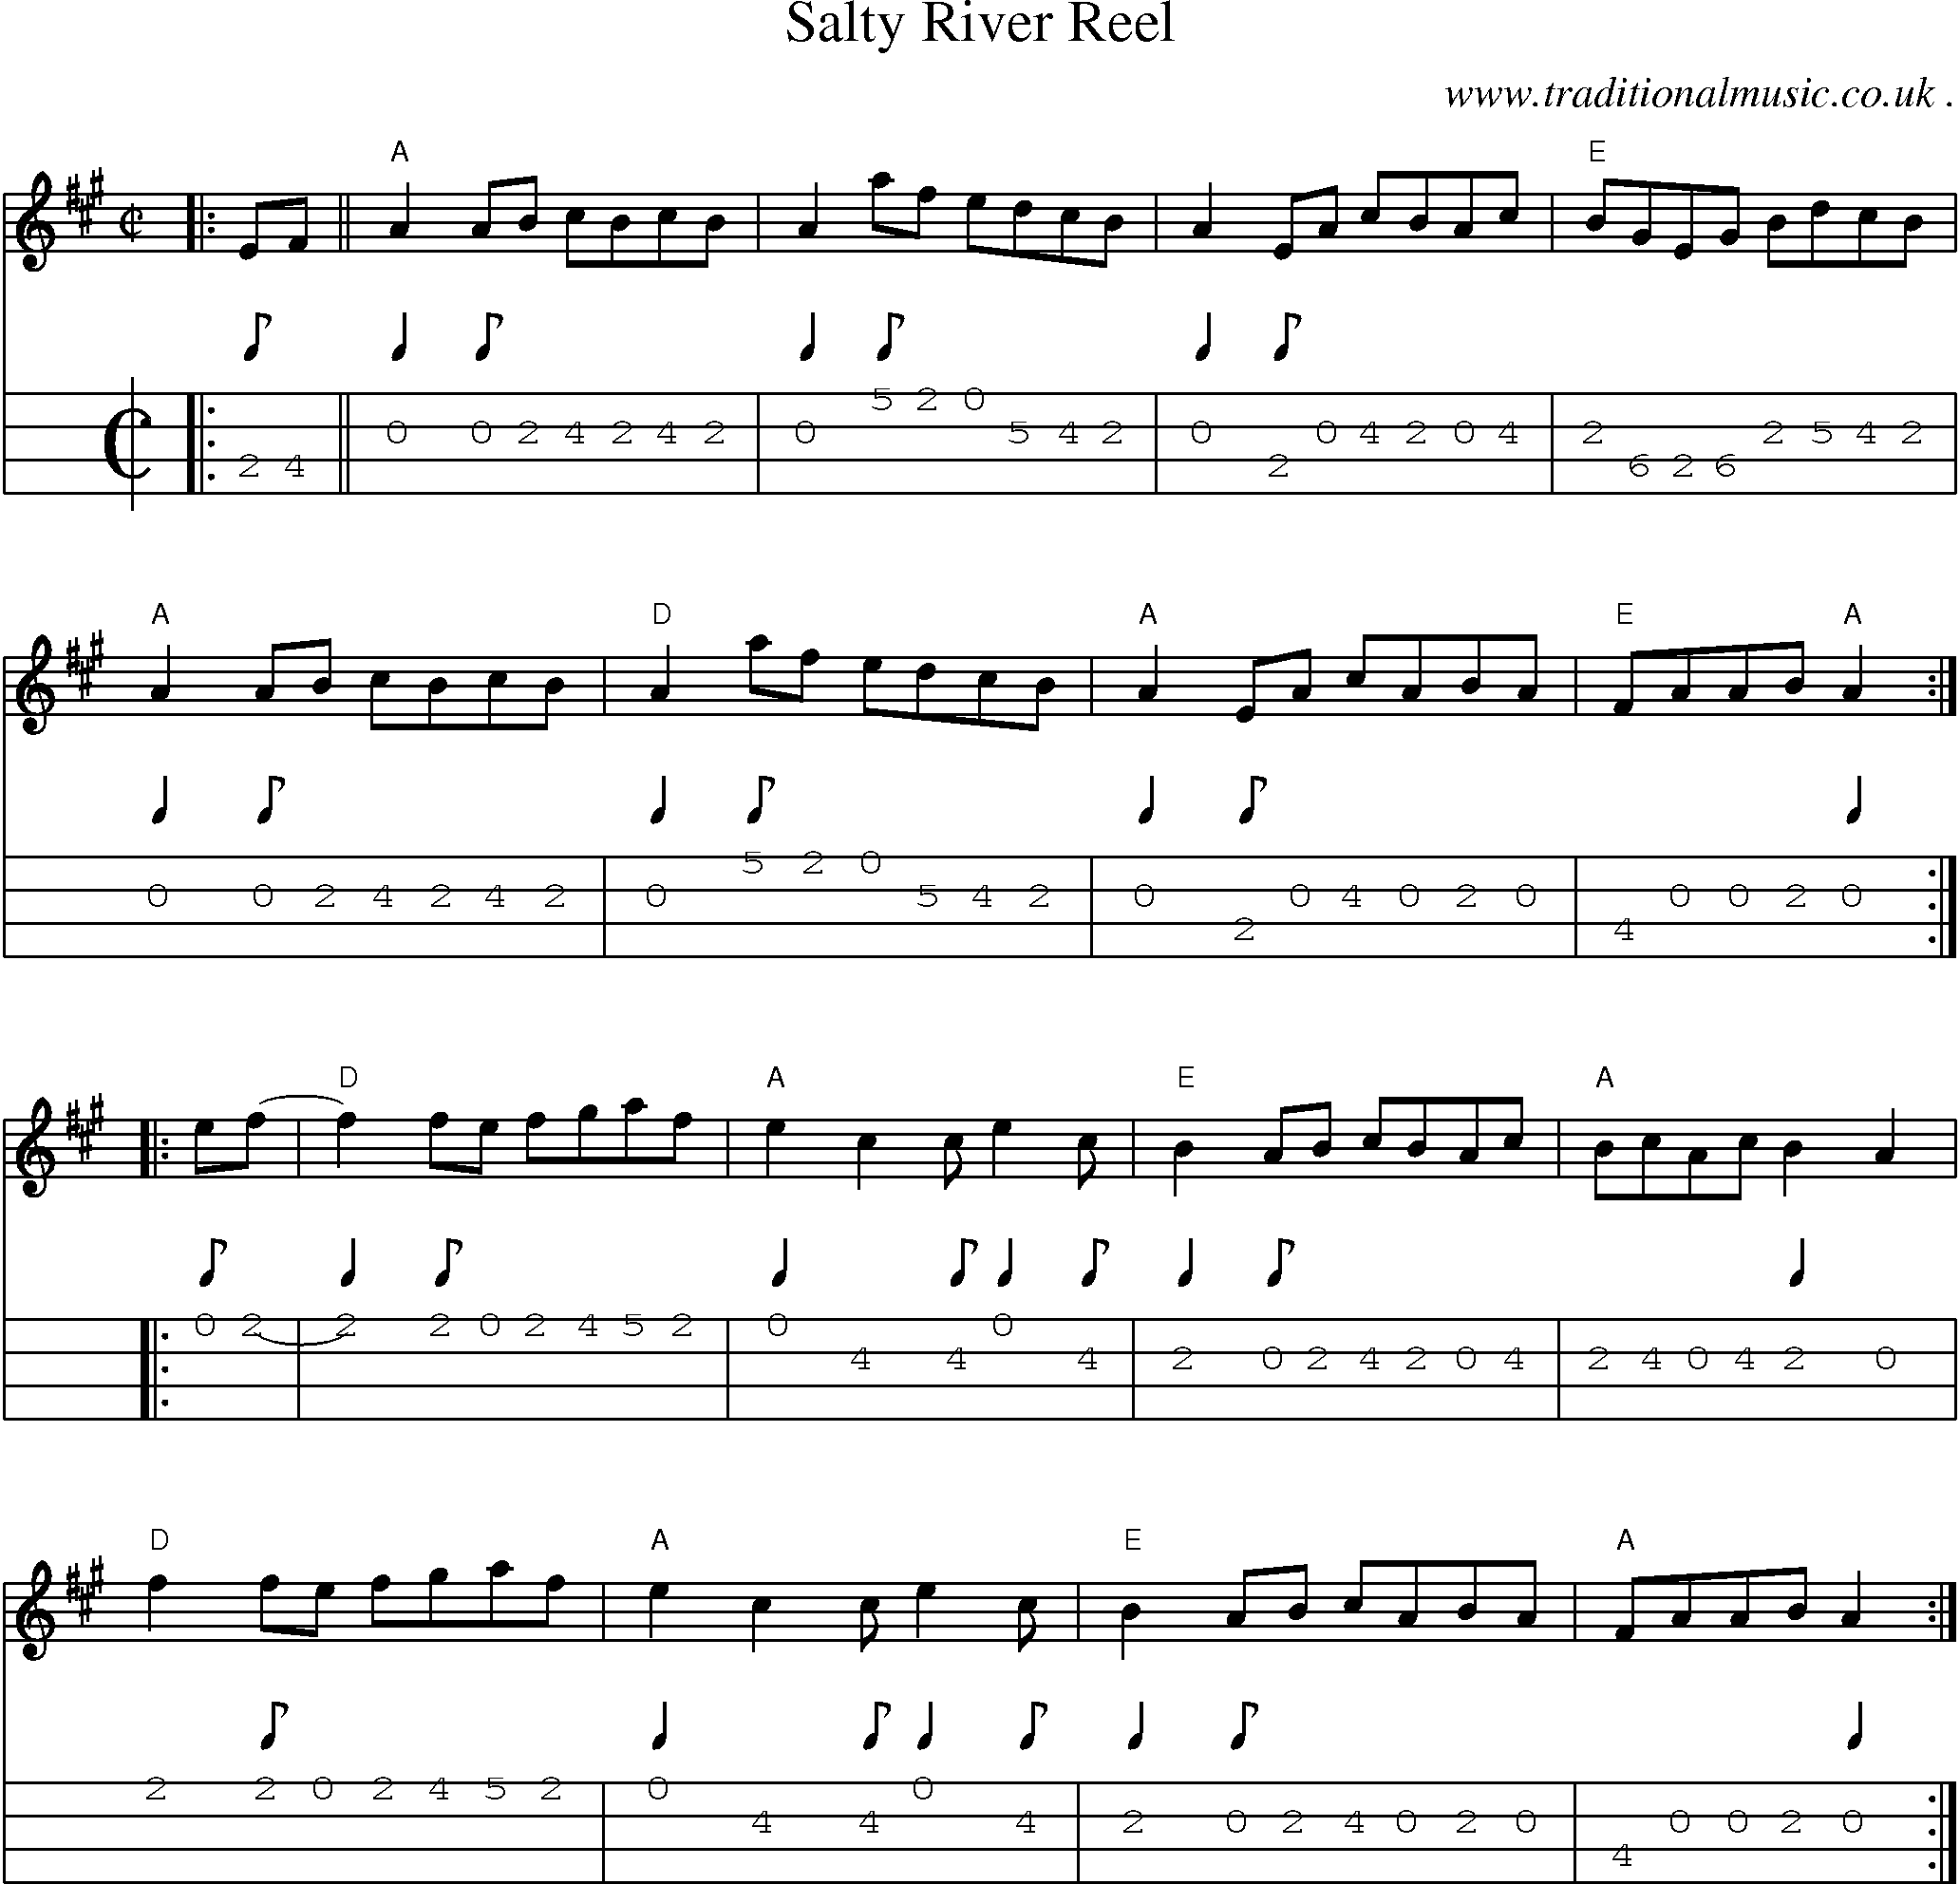 Music Score and Guitar Tabs for Salty River Reel